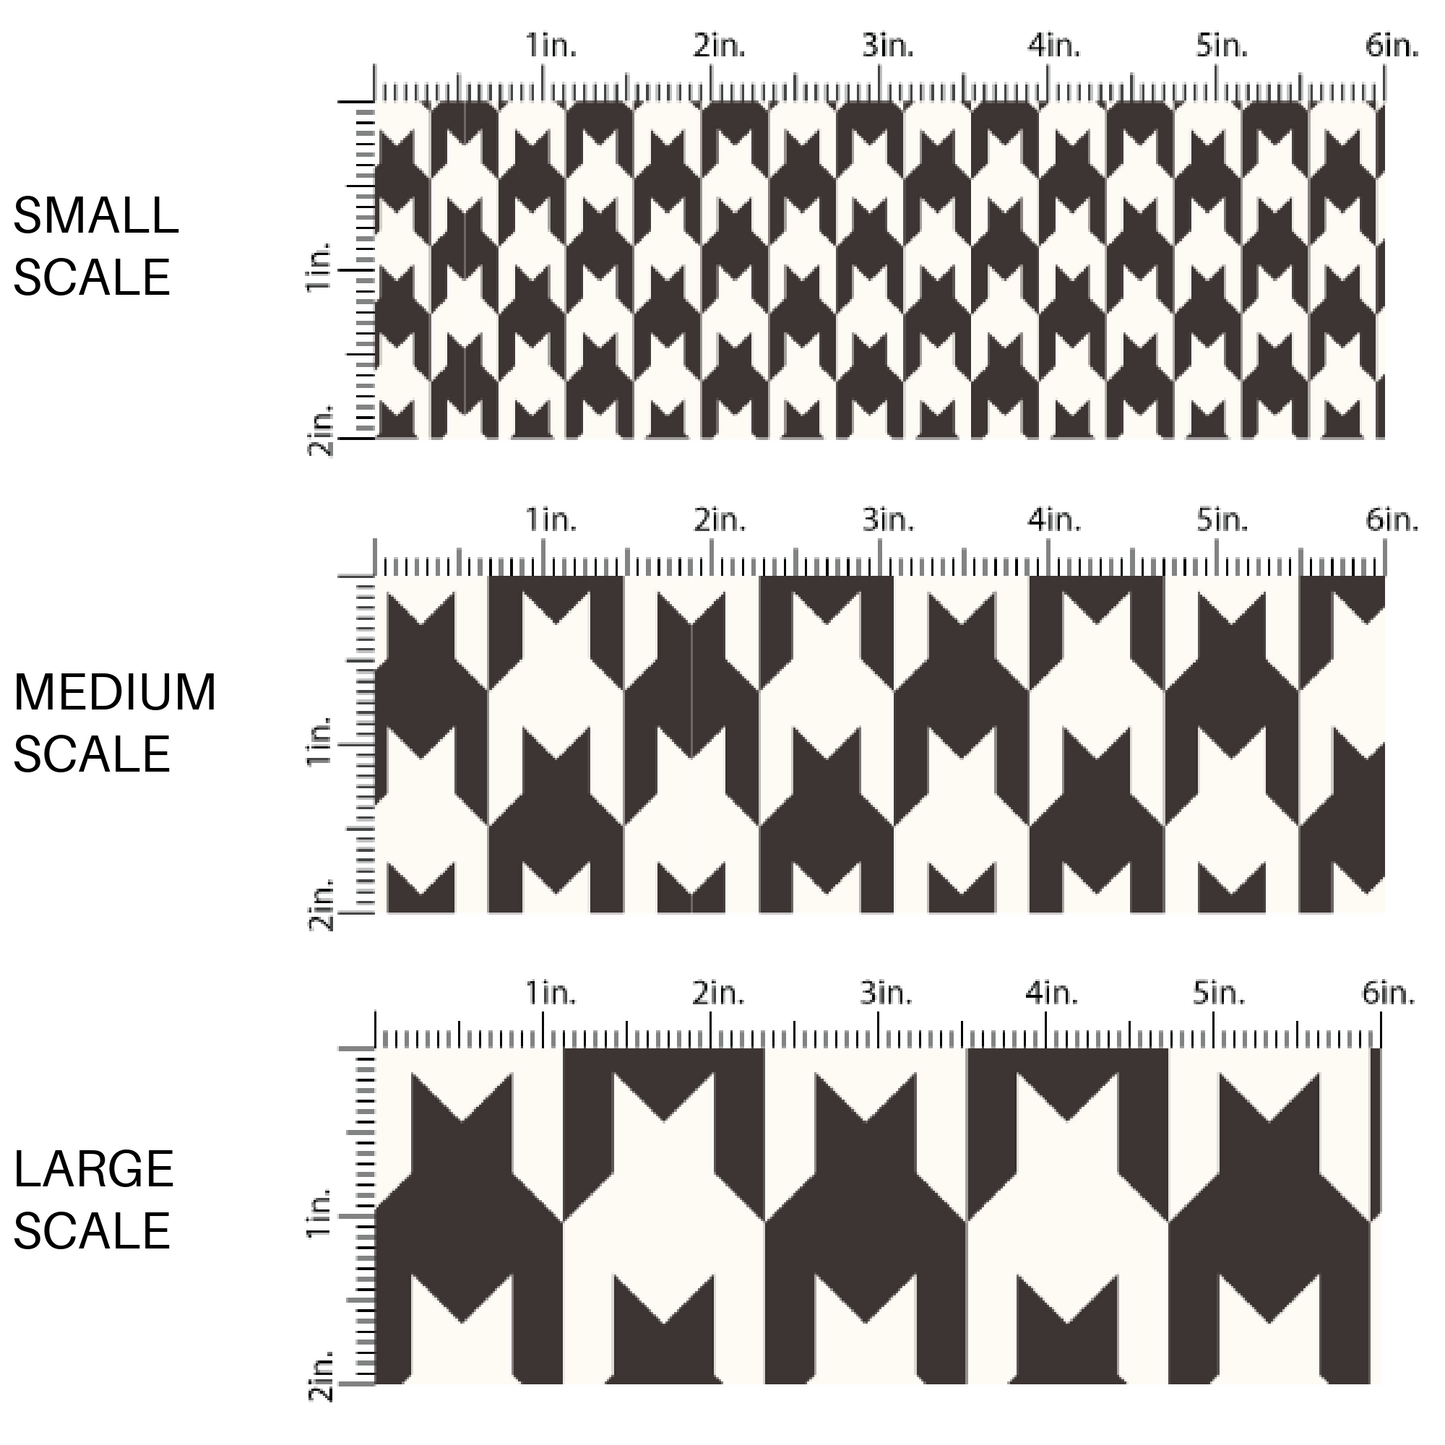 Black and White Hound's-tooth Fabric by the Yard scaled image guide.